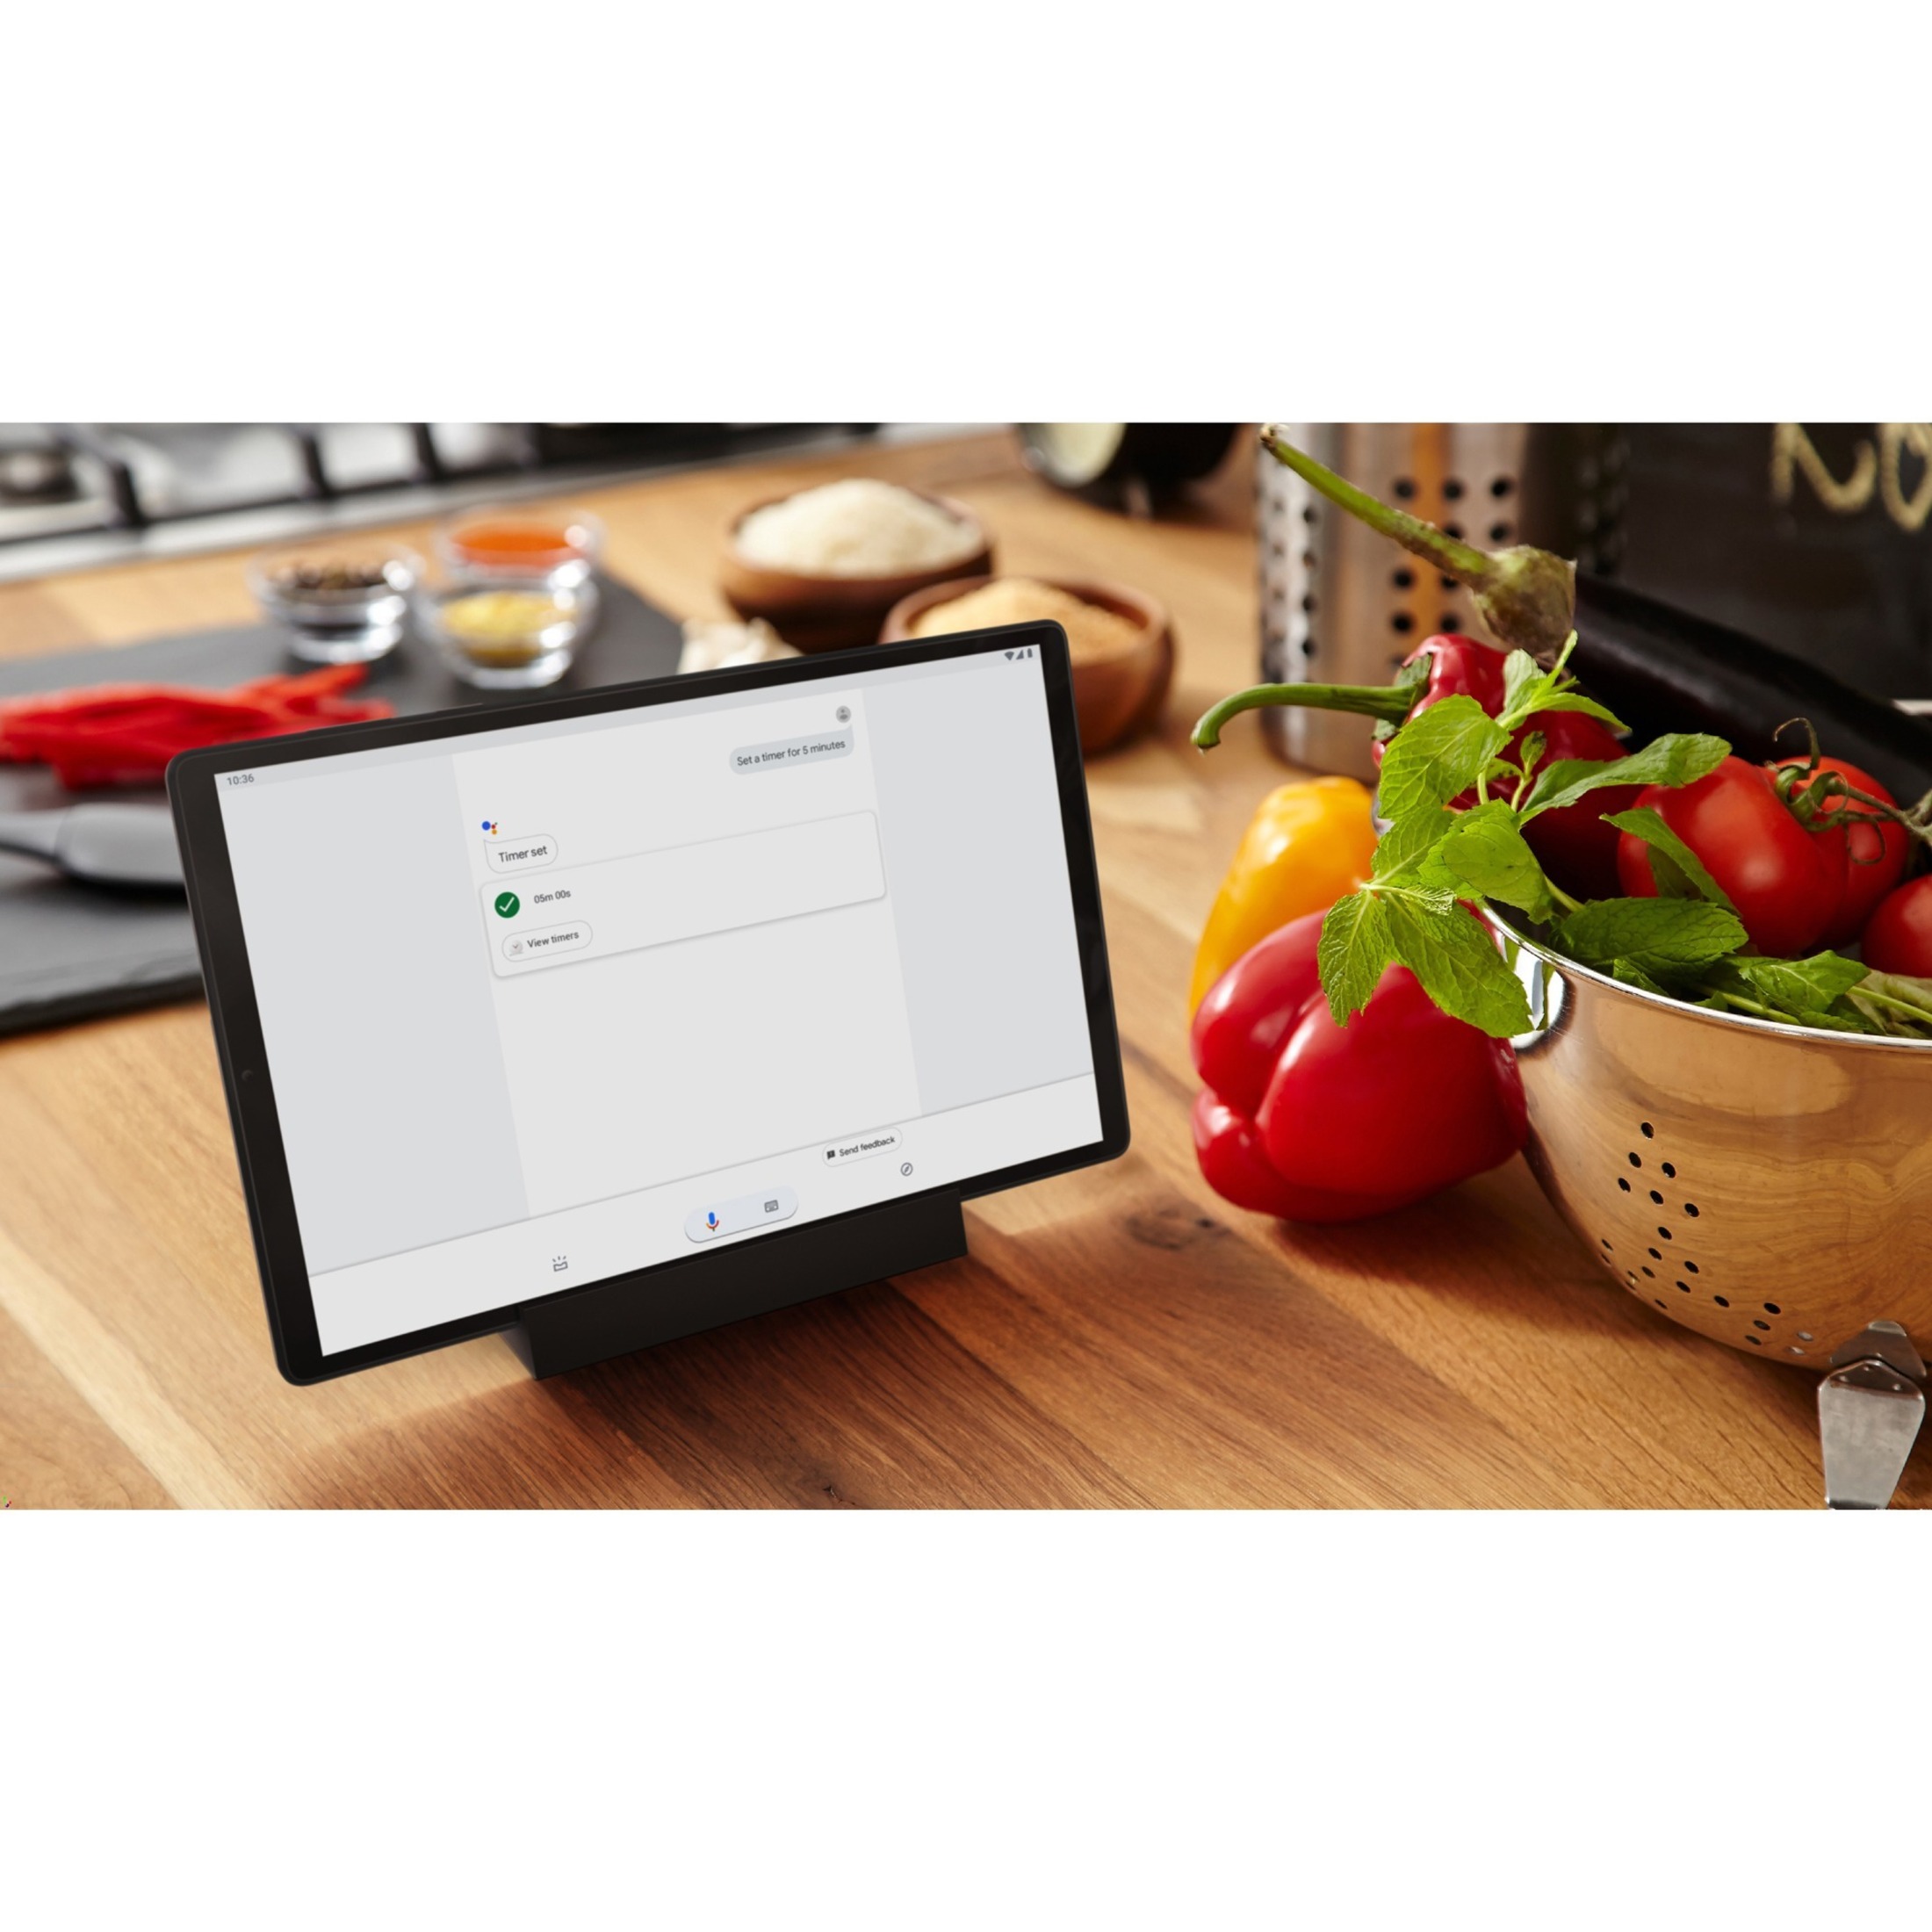 Lenovo Tab M10 10.3" Tablet - MediaTek Helio P22T - 4GB - 64GB FHD Plus with the Smart Charging Station - Android 9.0 (Pie) - image 8 of 33